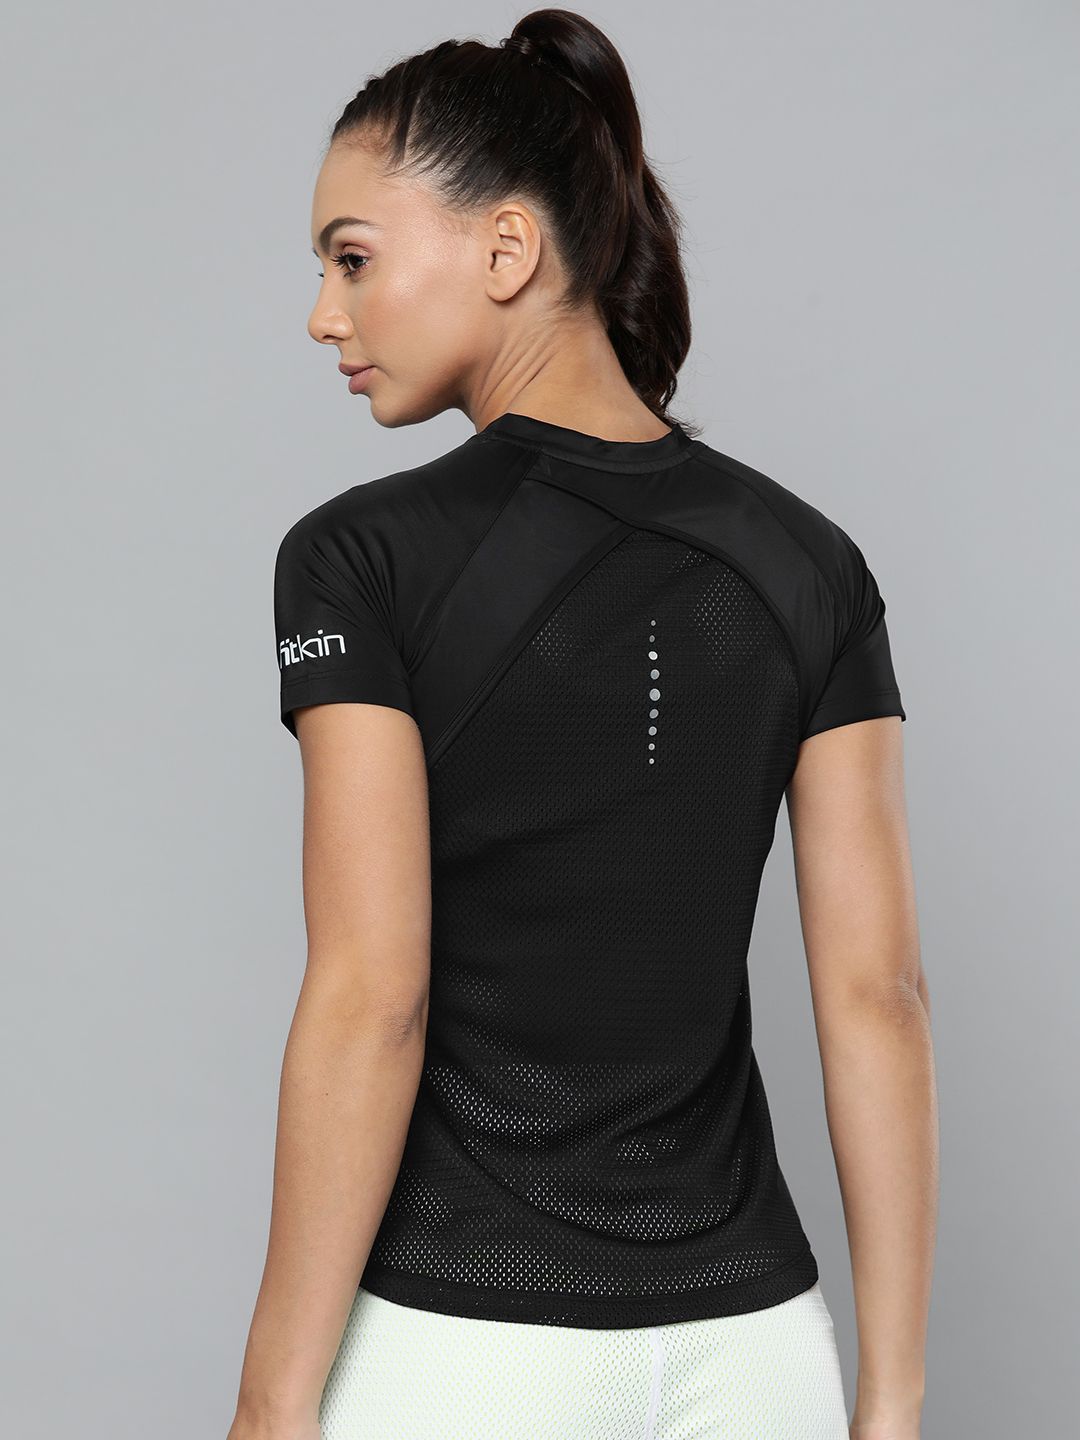 Fitkin Women Black Slim Fit Training or Gym T-shirt Price in India